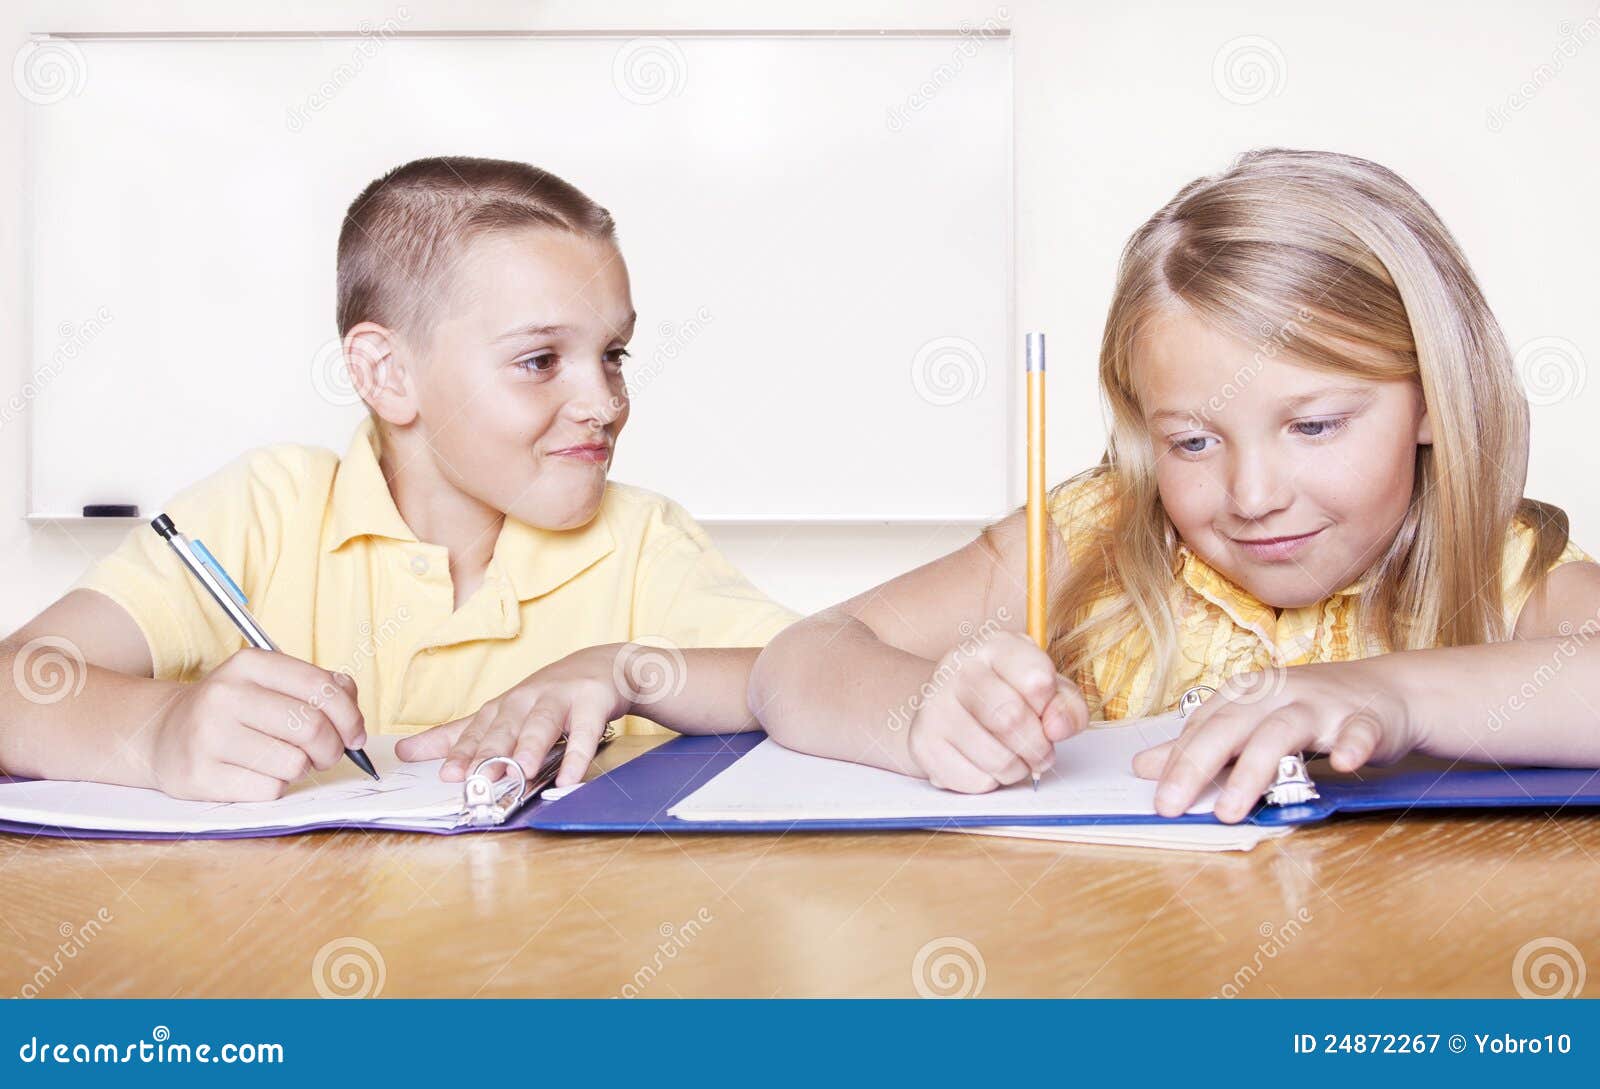 elementary students should have homework